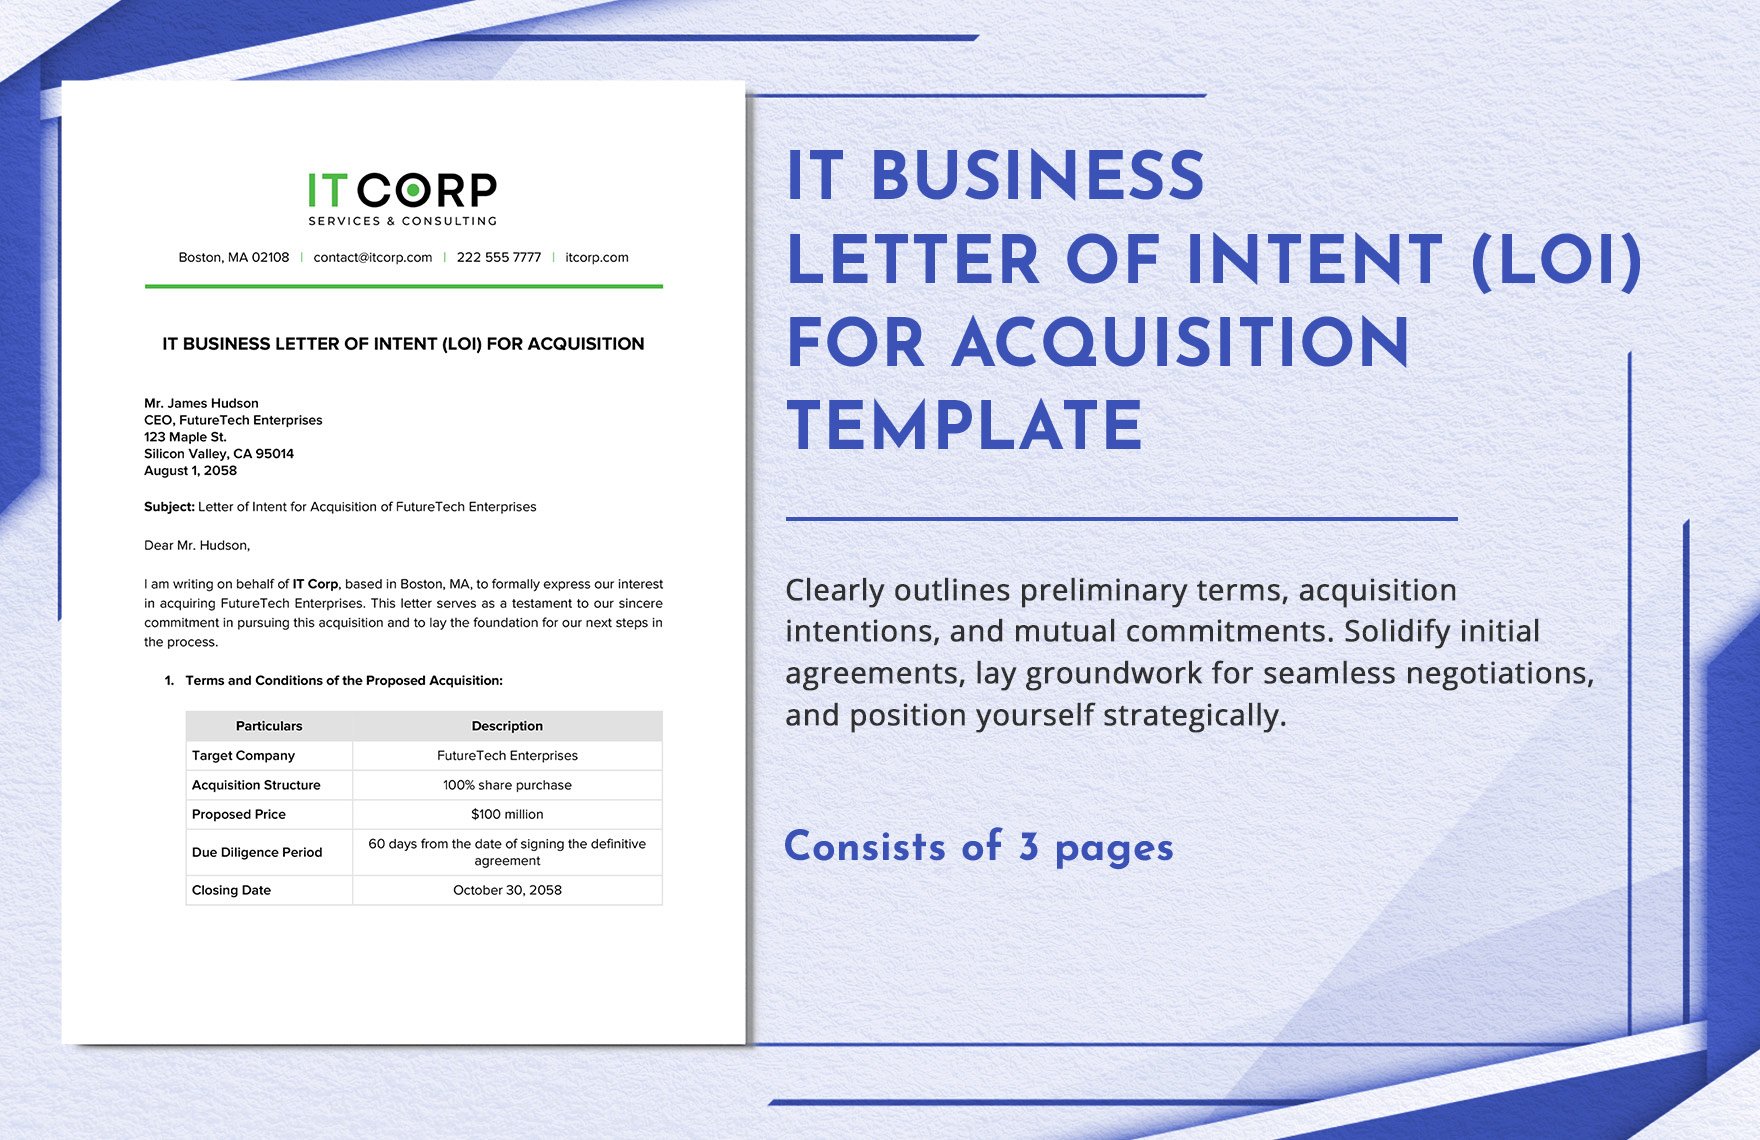 IT Business Letter of Intent (LOI) for Acquisition Template